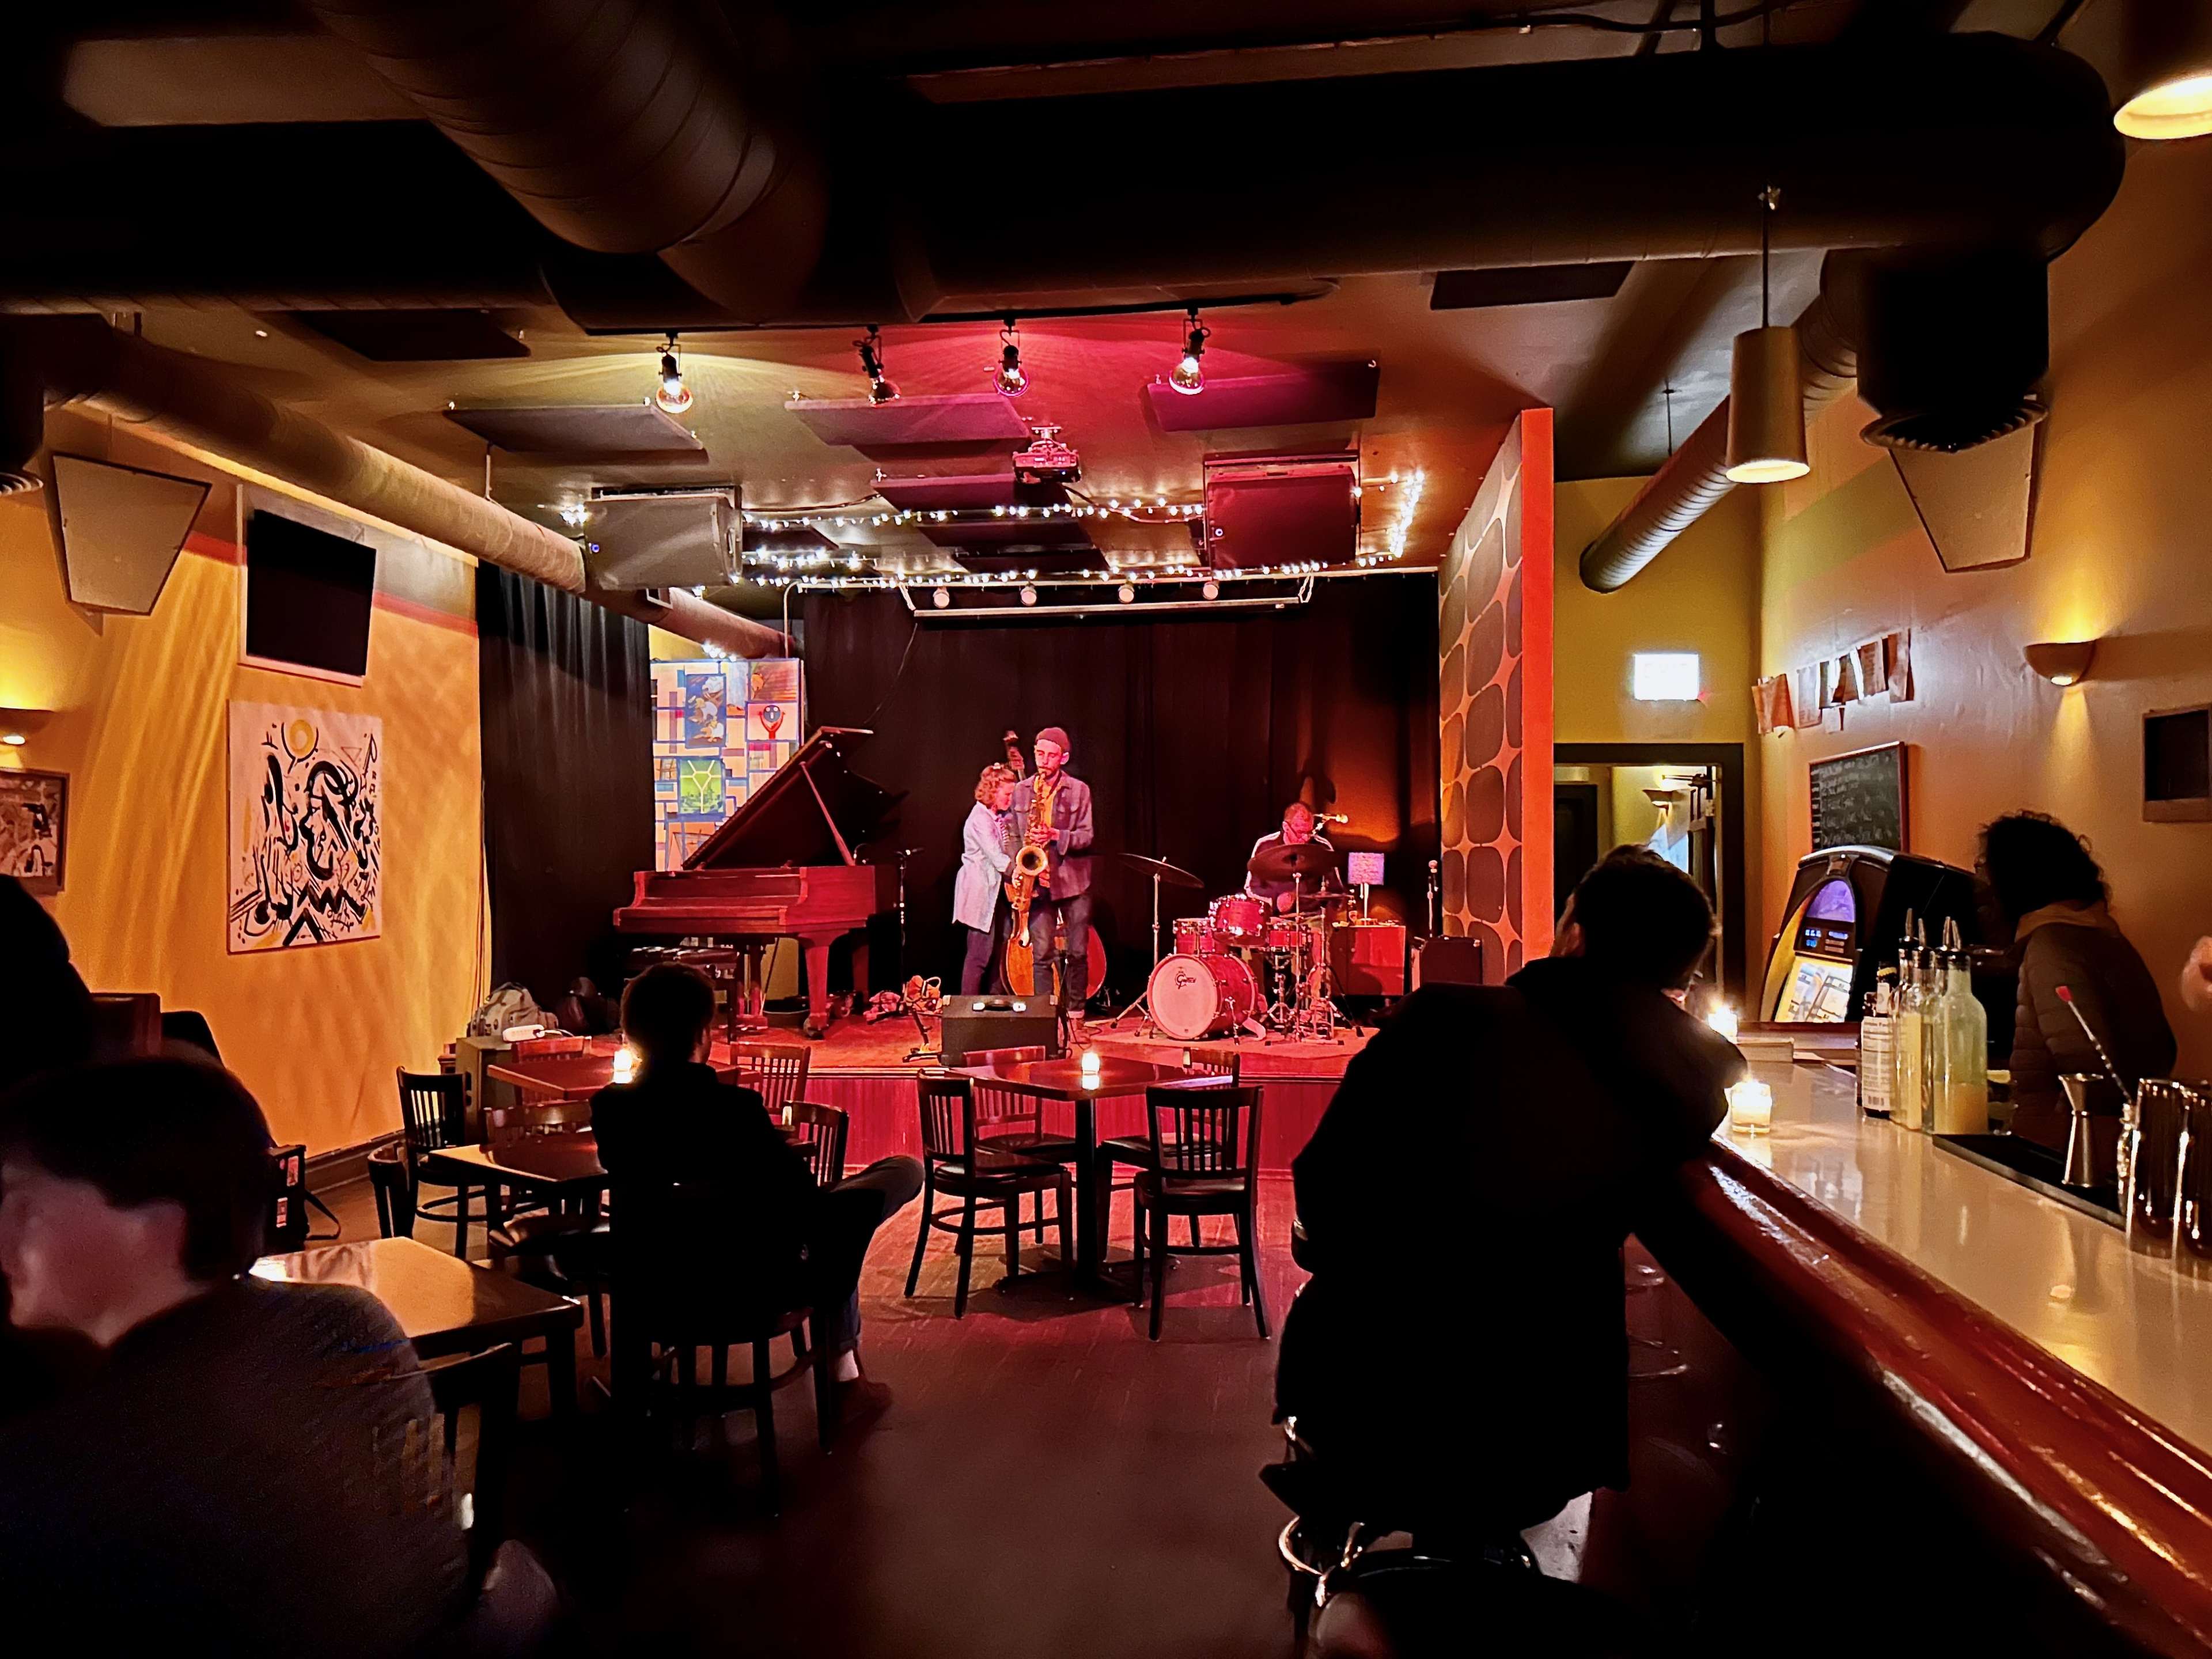 A dimly lit bar with a jazz trio performing on a stage at the back.